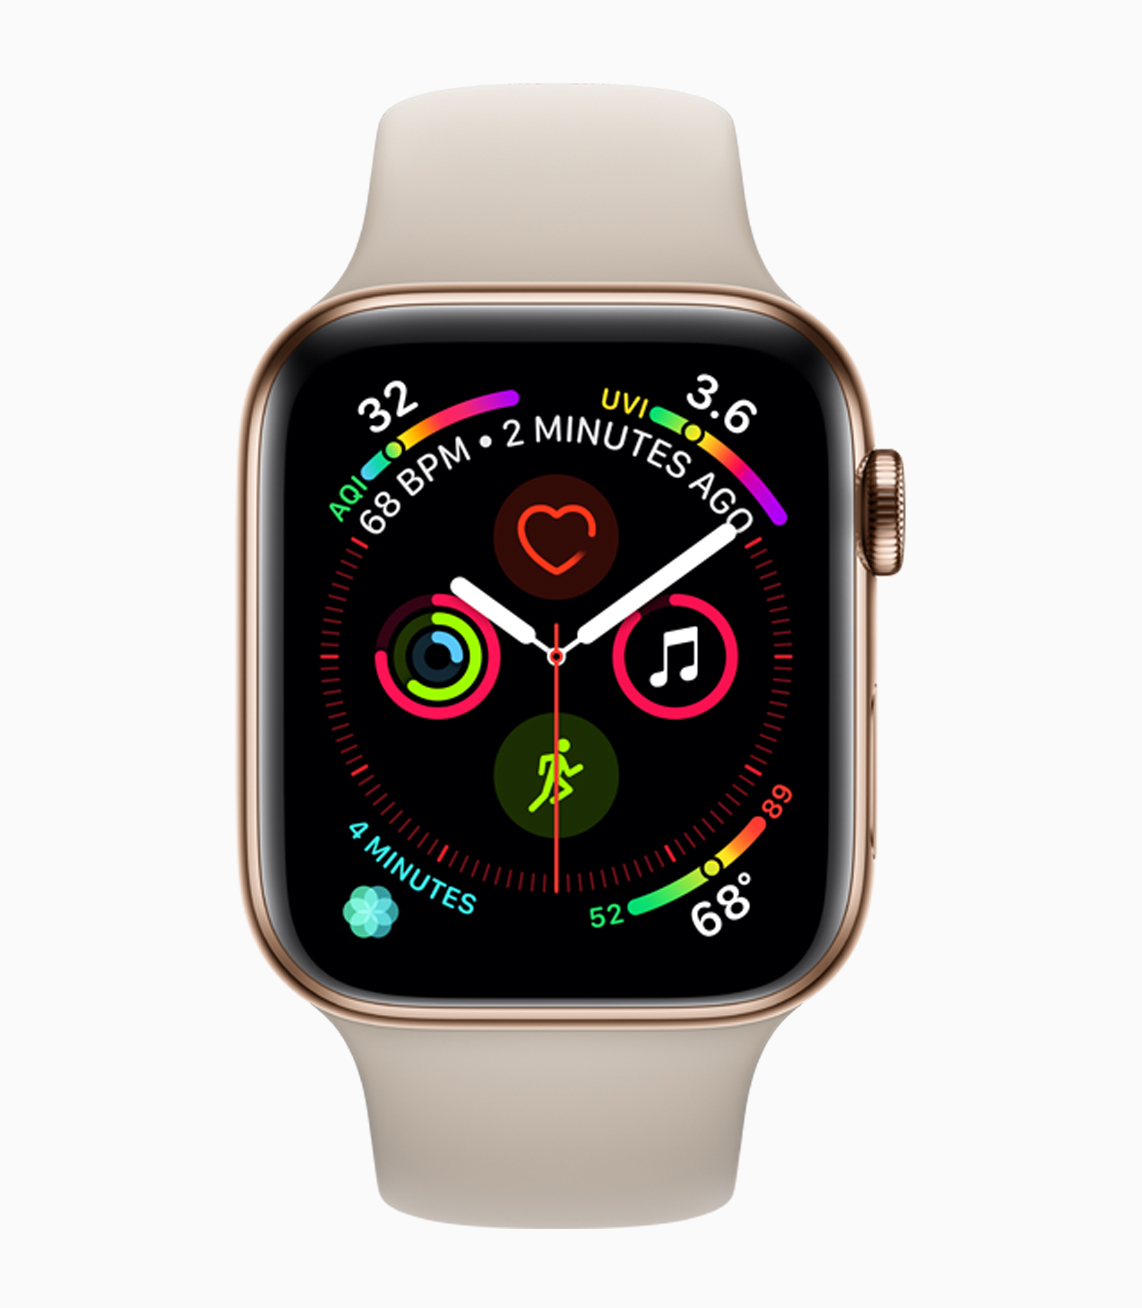 Complications on a Series 4 Apple Watch. Image: Apple.com